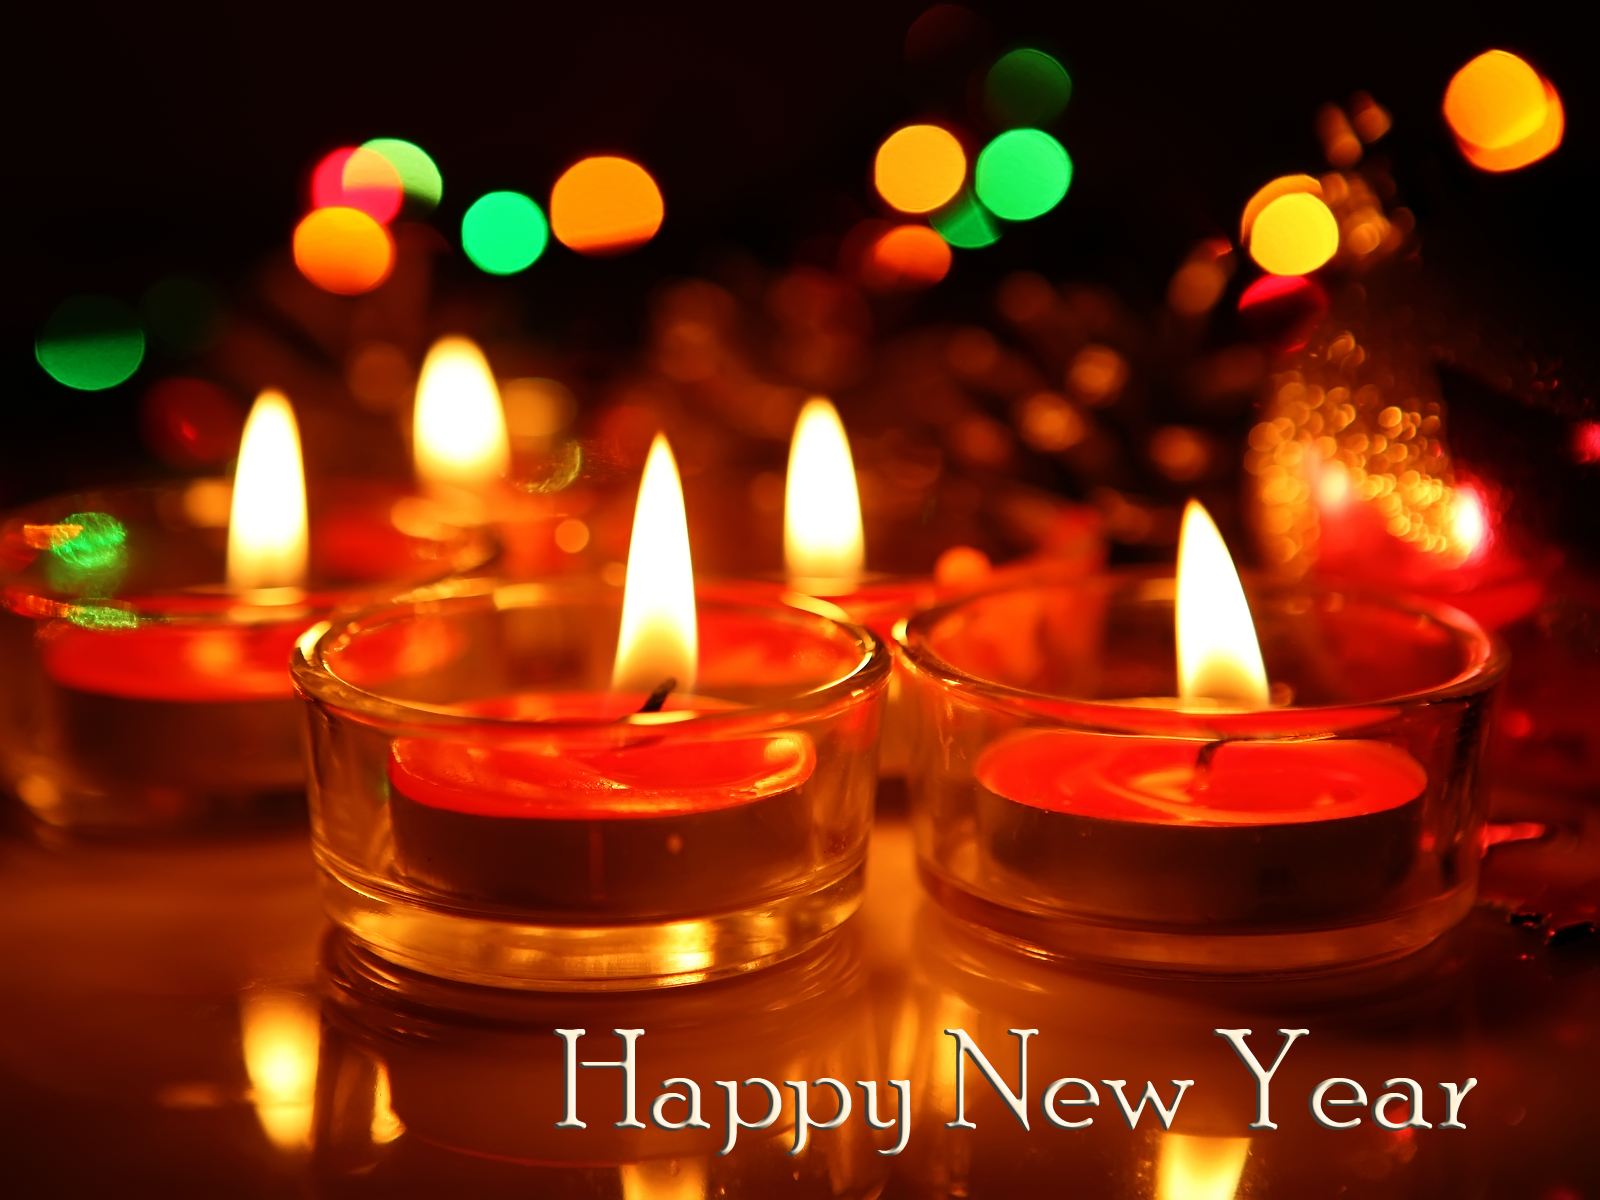 Happy New Year Wallpapers HD free download